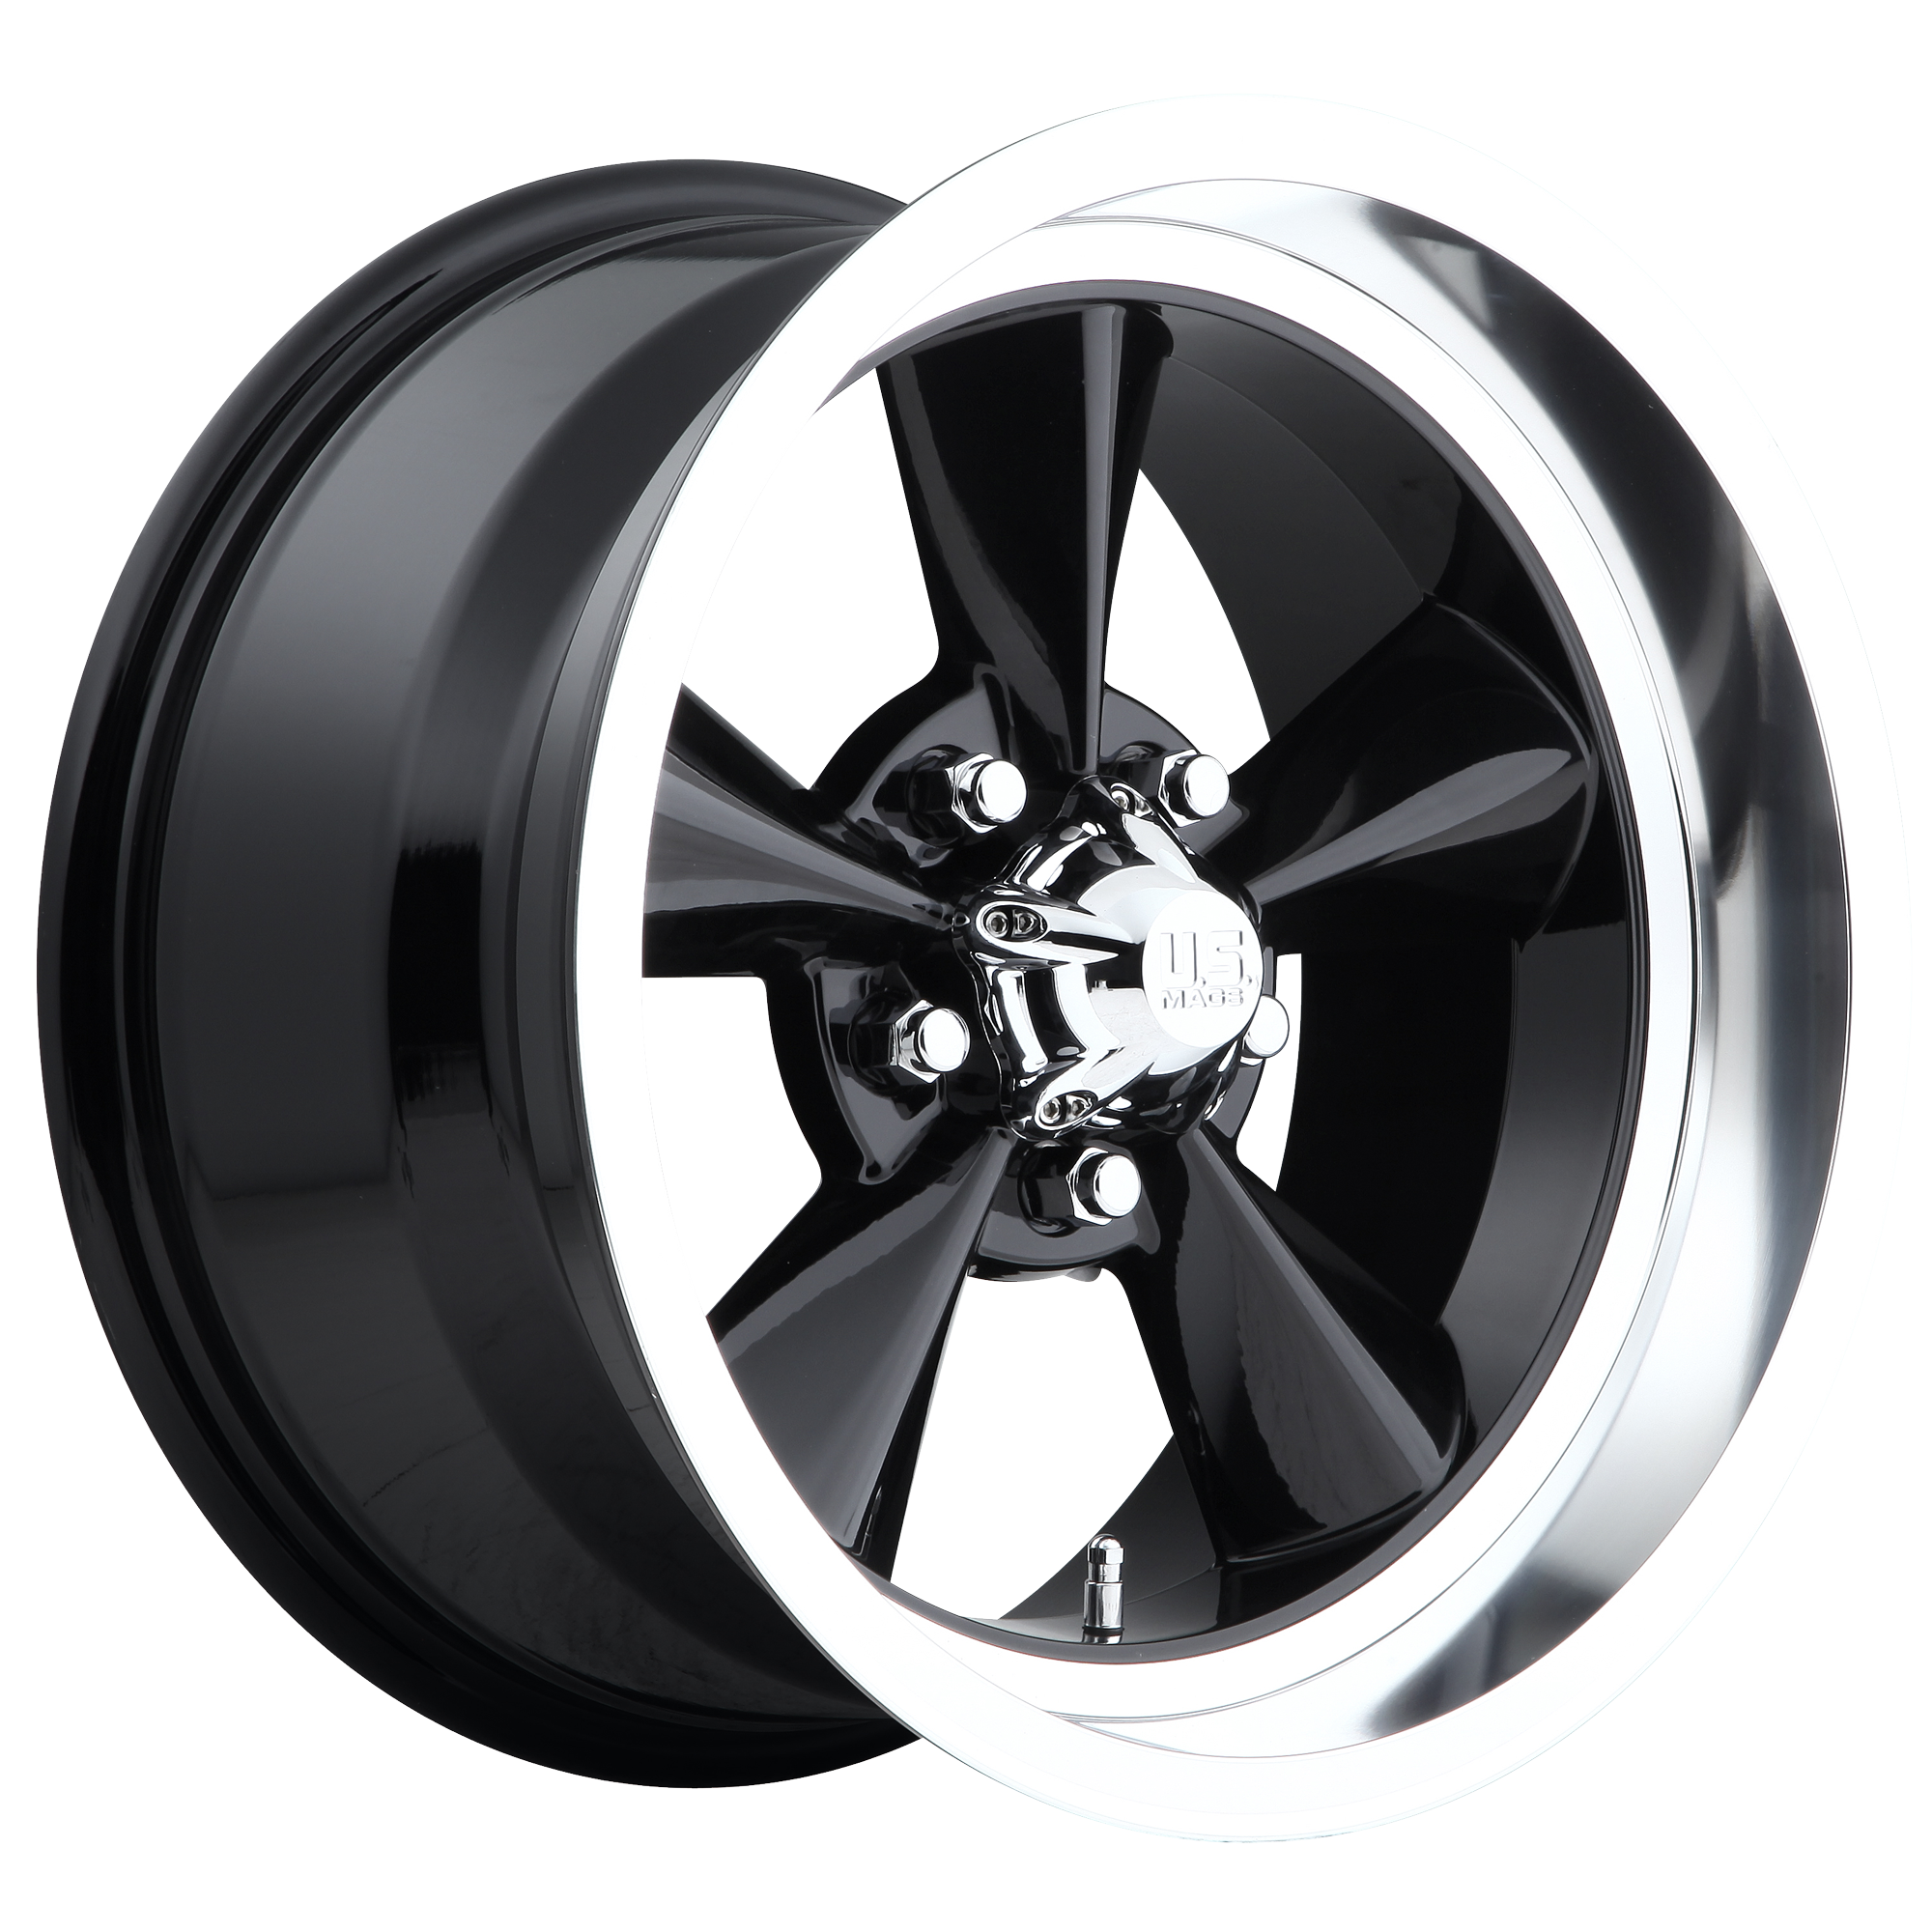 STANDARD 17x7 5x120.65 GLOSS BLACK (1 mm) - Tires and Engine Performance